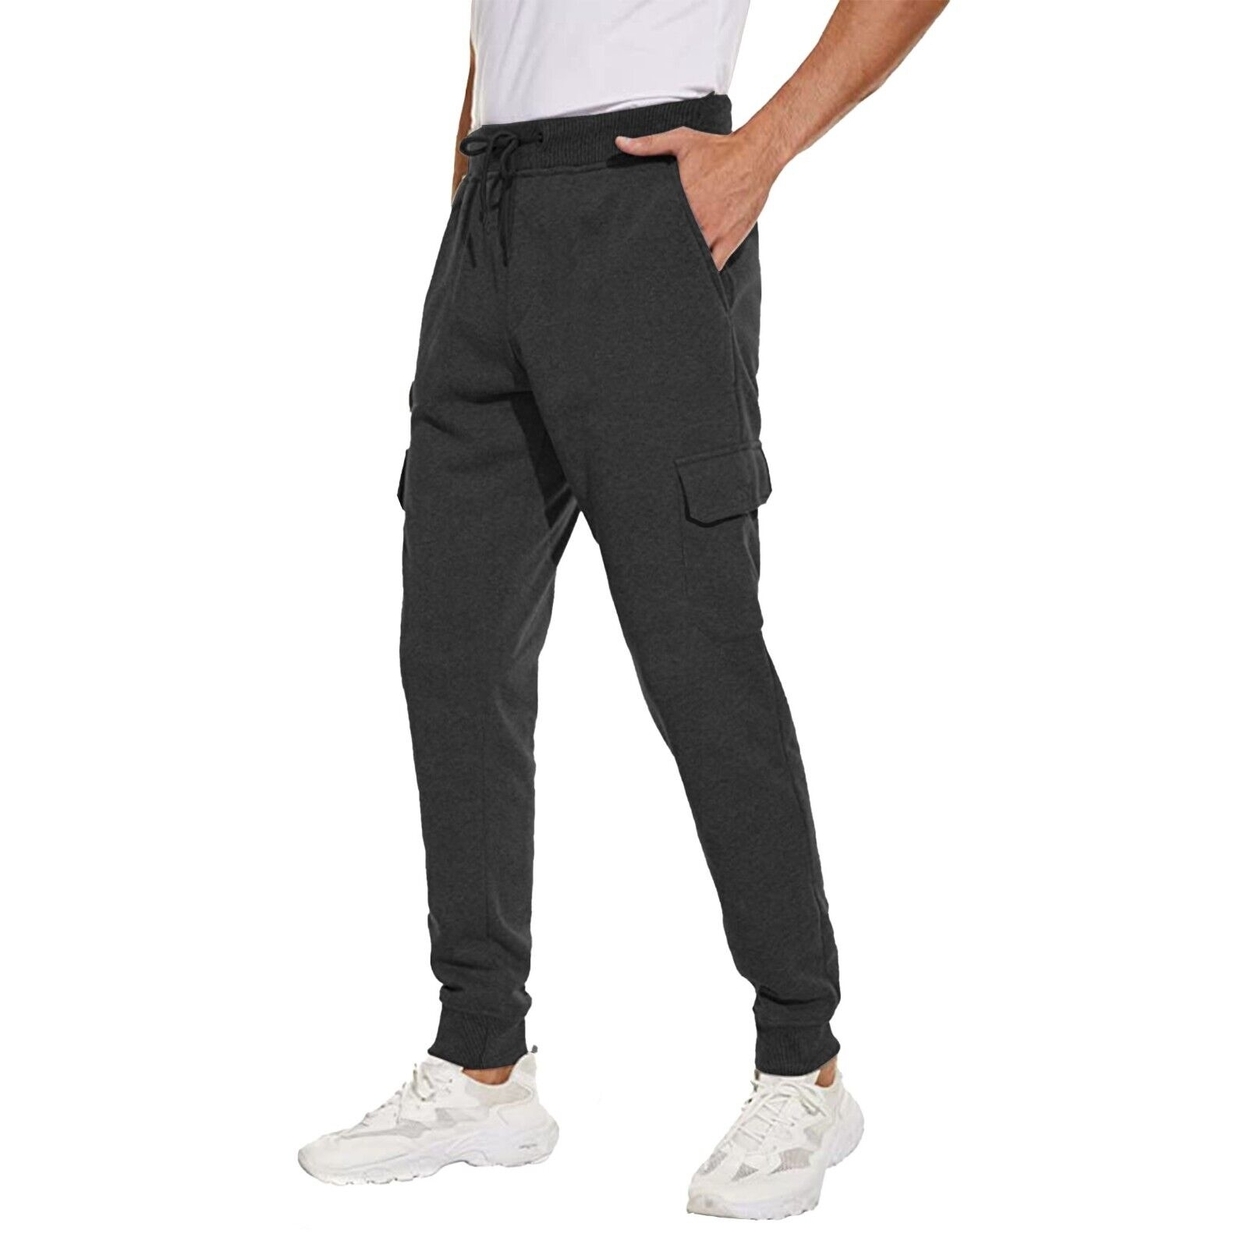 Men's Ultra Soft Winter Warm Thick Sweat Pant Athletic Sherpa Lined Jogger Pants - Black, Large